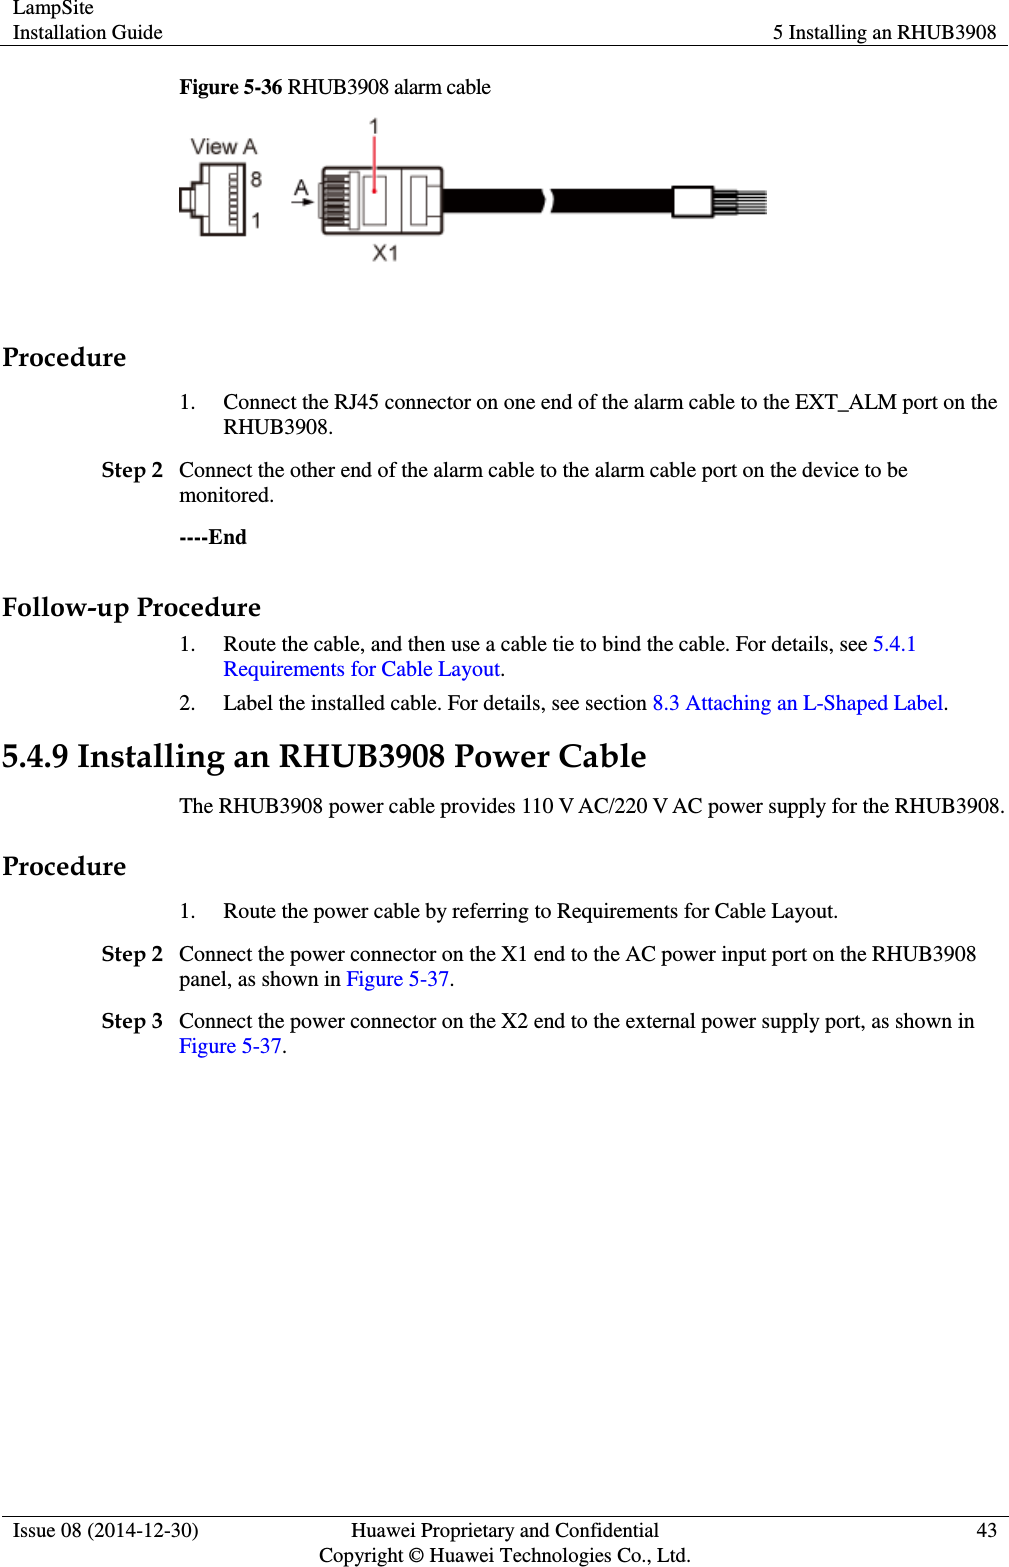 LampSite Installation Guide 5 Installing an RHUB3908  Issue 08 (2014-12-30) Huawei Proprietary and Confidential                                     Copyright © Huawei Technologies Co., Ltd. 43  Figure 5-36 RHUB3908 alarm cable   Procedure 1. Connect the RJ45 connector on one end of the alarm cable to the EXT_ALM port on the RHUB3908.   Step 2 Connect the other end of the alarm cable to the alarm cable port on the device to be monitored.   ----End Follow-up Procedure 1. Route the cable, and then use a cable tie to bind the cable. For details, see 5.4.1 Requirements for Cable Layout. 2. Label the installed cable. For details, see section 8.3 Attaching an L-Shaped Label. 5.4.9 Installing an RHUB3908 Power Cable The RHUB3908 power cable provides 110 V AC/220 V AC power supply for the RHUB3908.   Procedure 1. Route the power cable by referring to Requirements for Cable Layout.   Step 2 Connect the power connector on the X1 end to the AC power input port on the RHUB3908 panel, as shown in Figure 5-37.   Step 3 Connect the power connector on the X2 end to the external power supply port, as shown in Figure 5-37.   